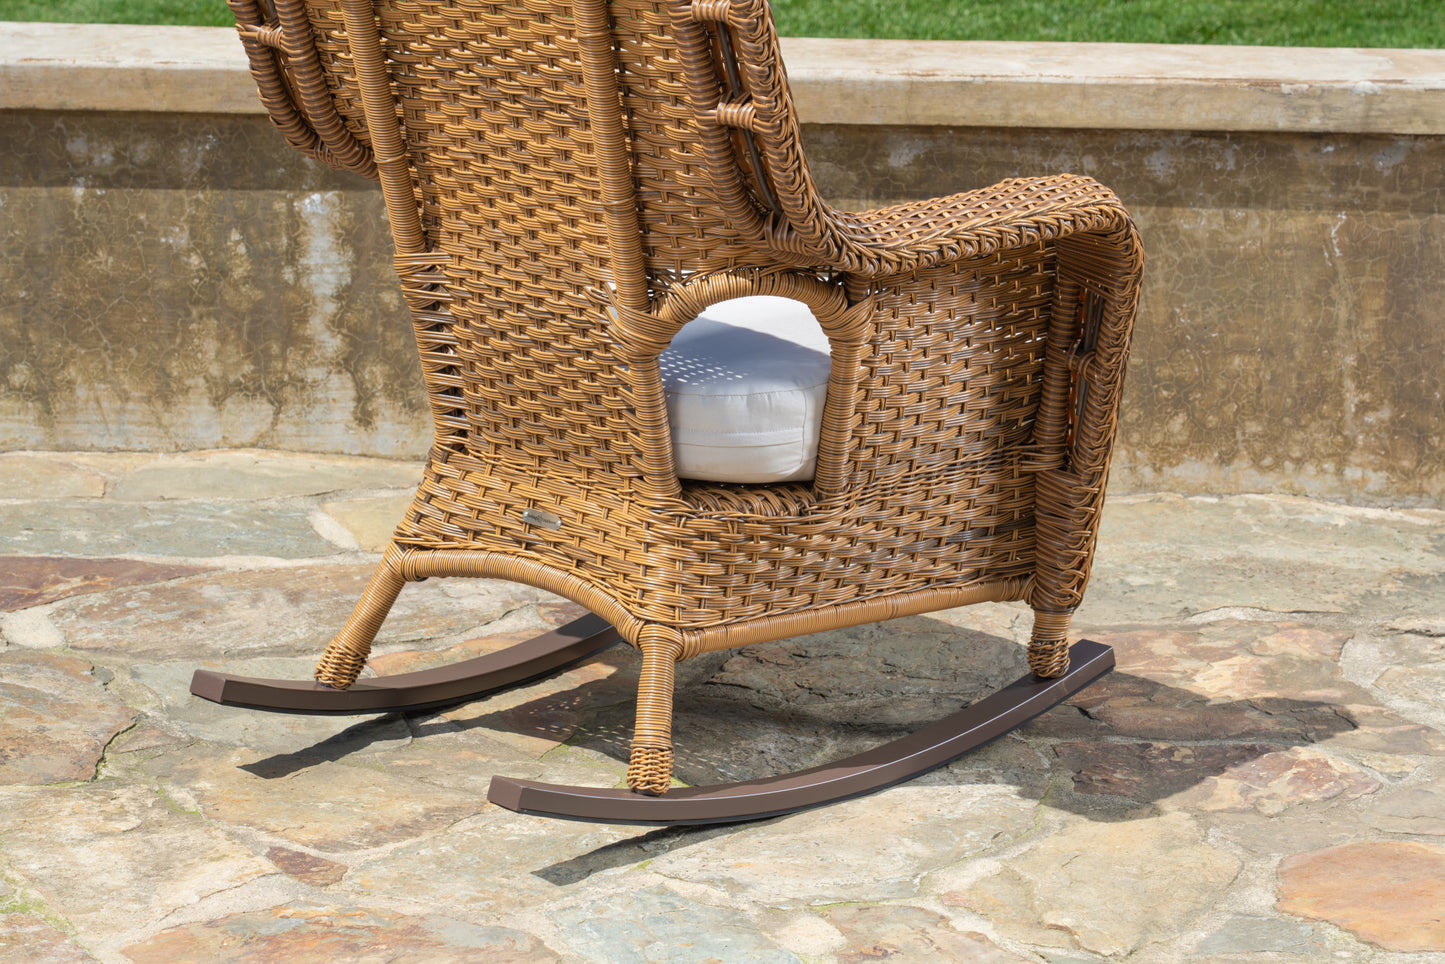 Sea Pines Mojave Wicker Outdoor Rocking Chair with Sunbrella Canvas Canvas Cushion